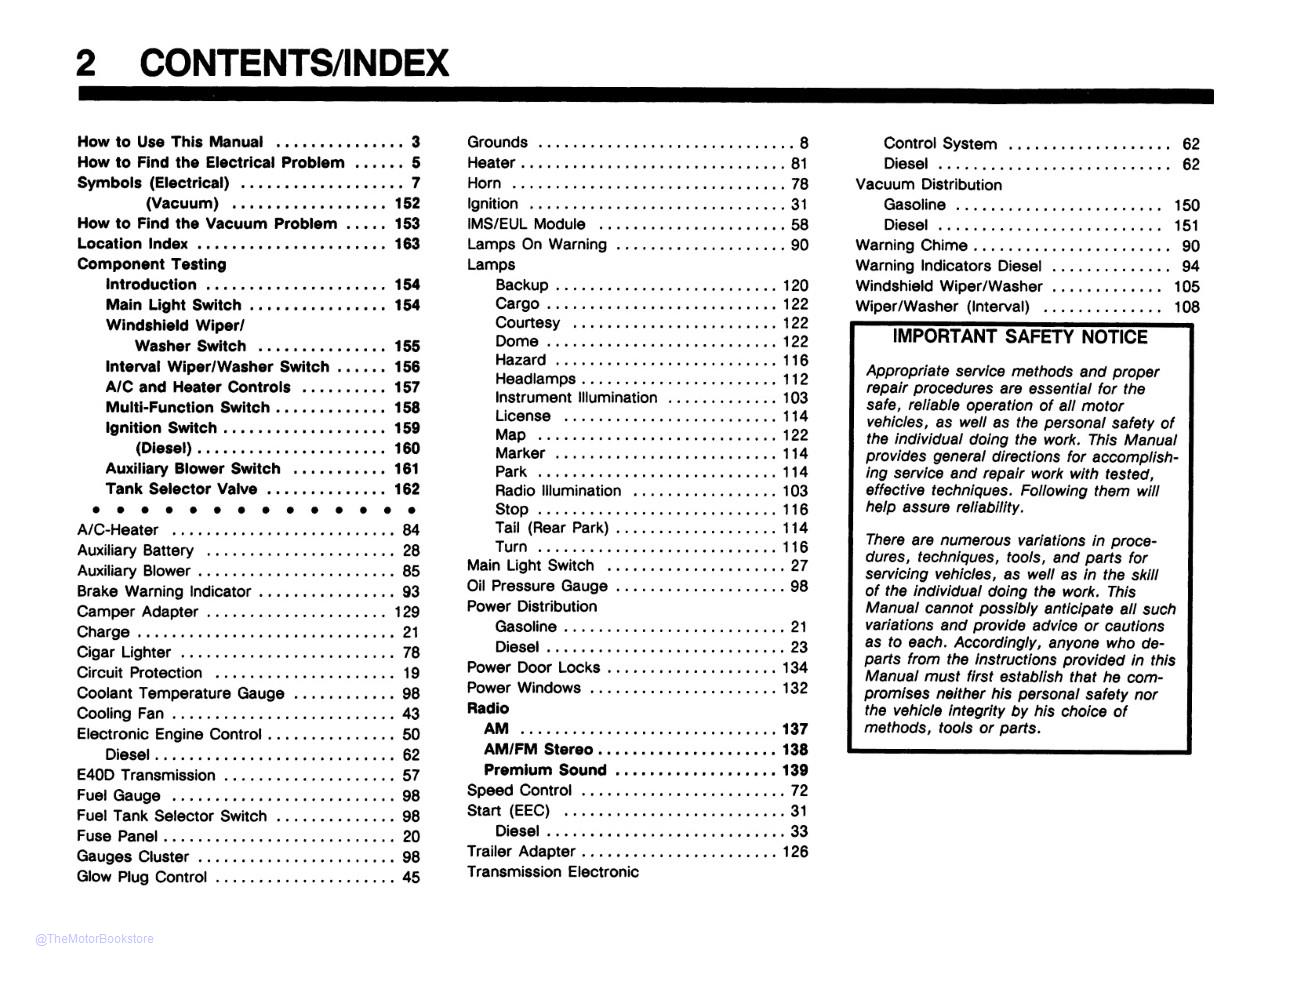 1989 Ford Econoline Electrical Vacuum Troubleshooting Manual  - Table of Contents